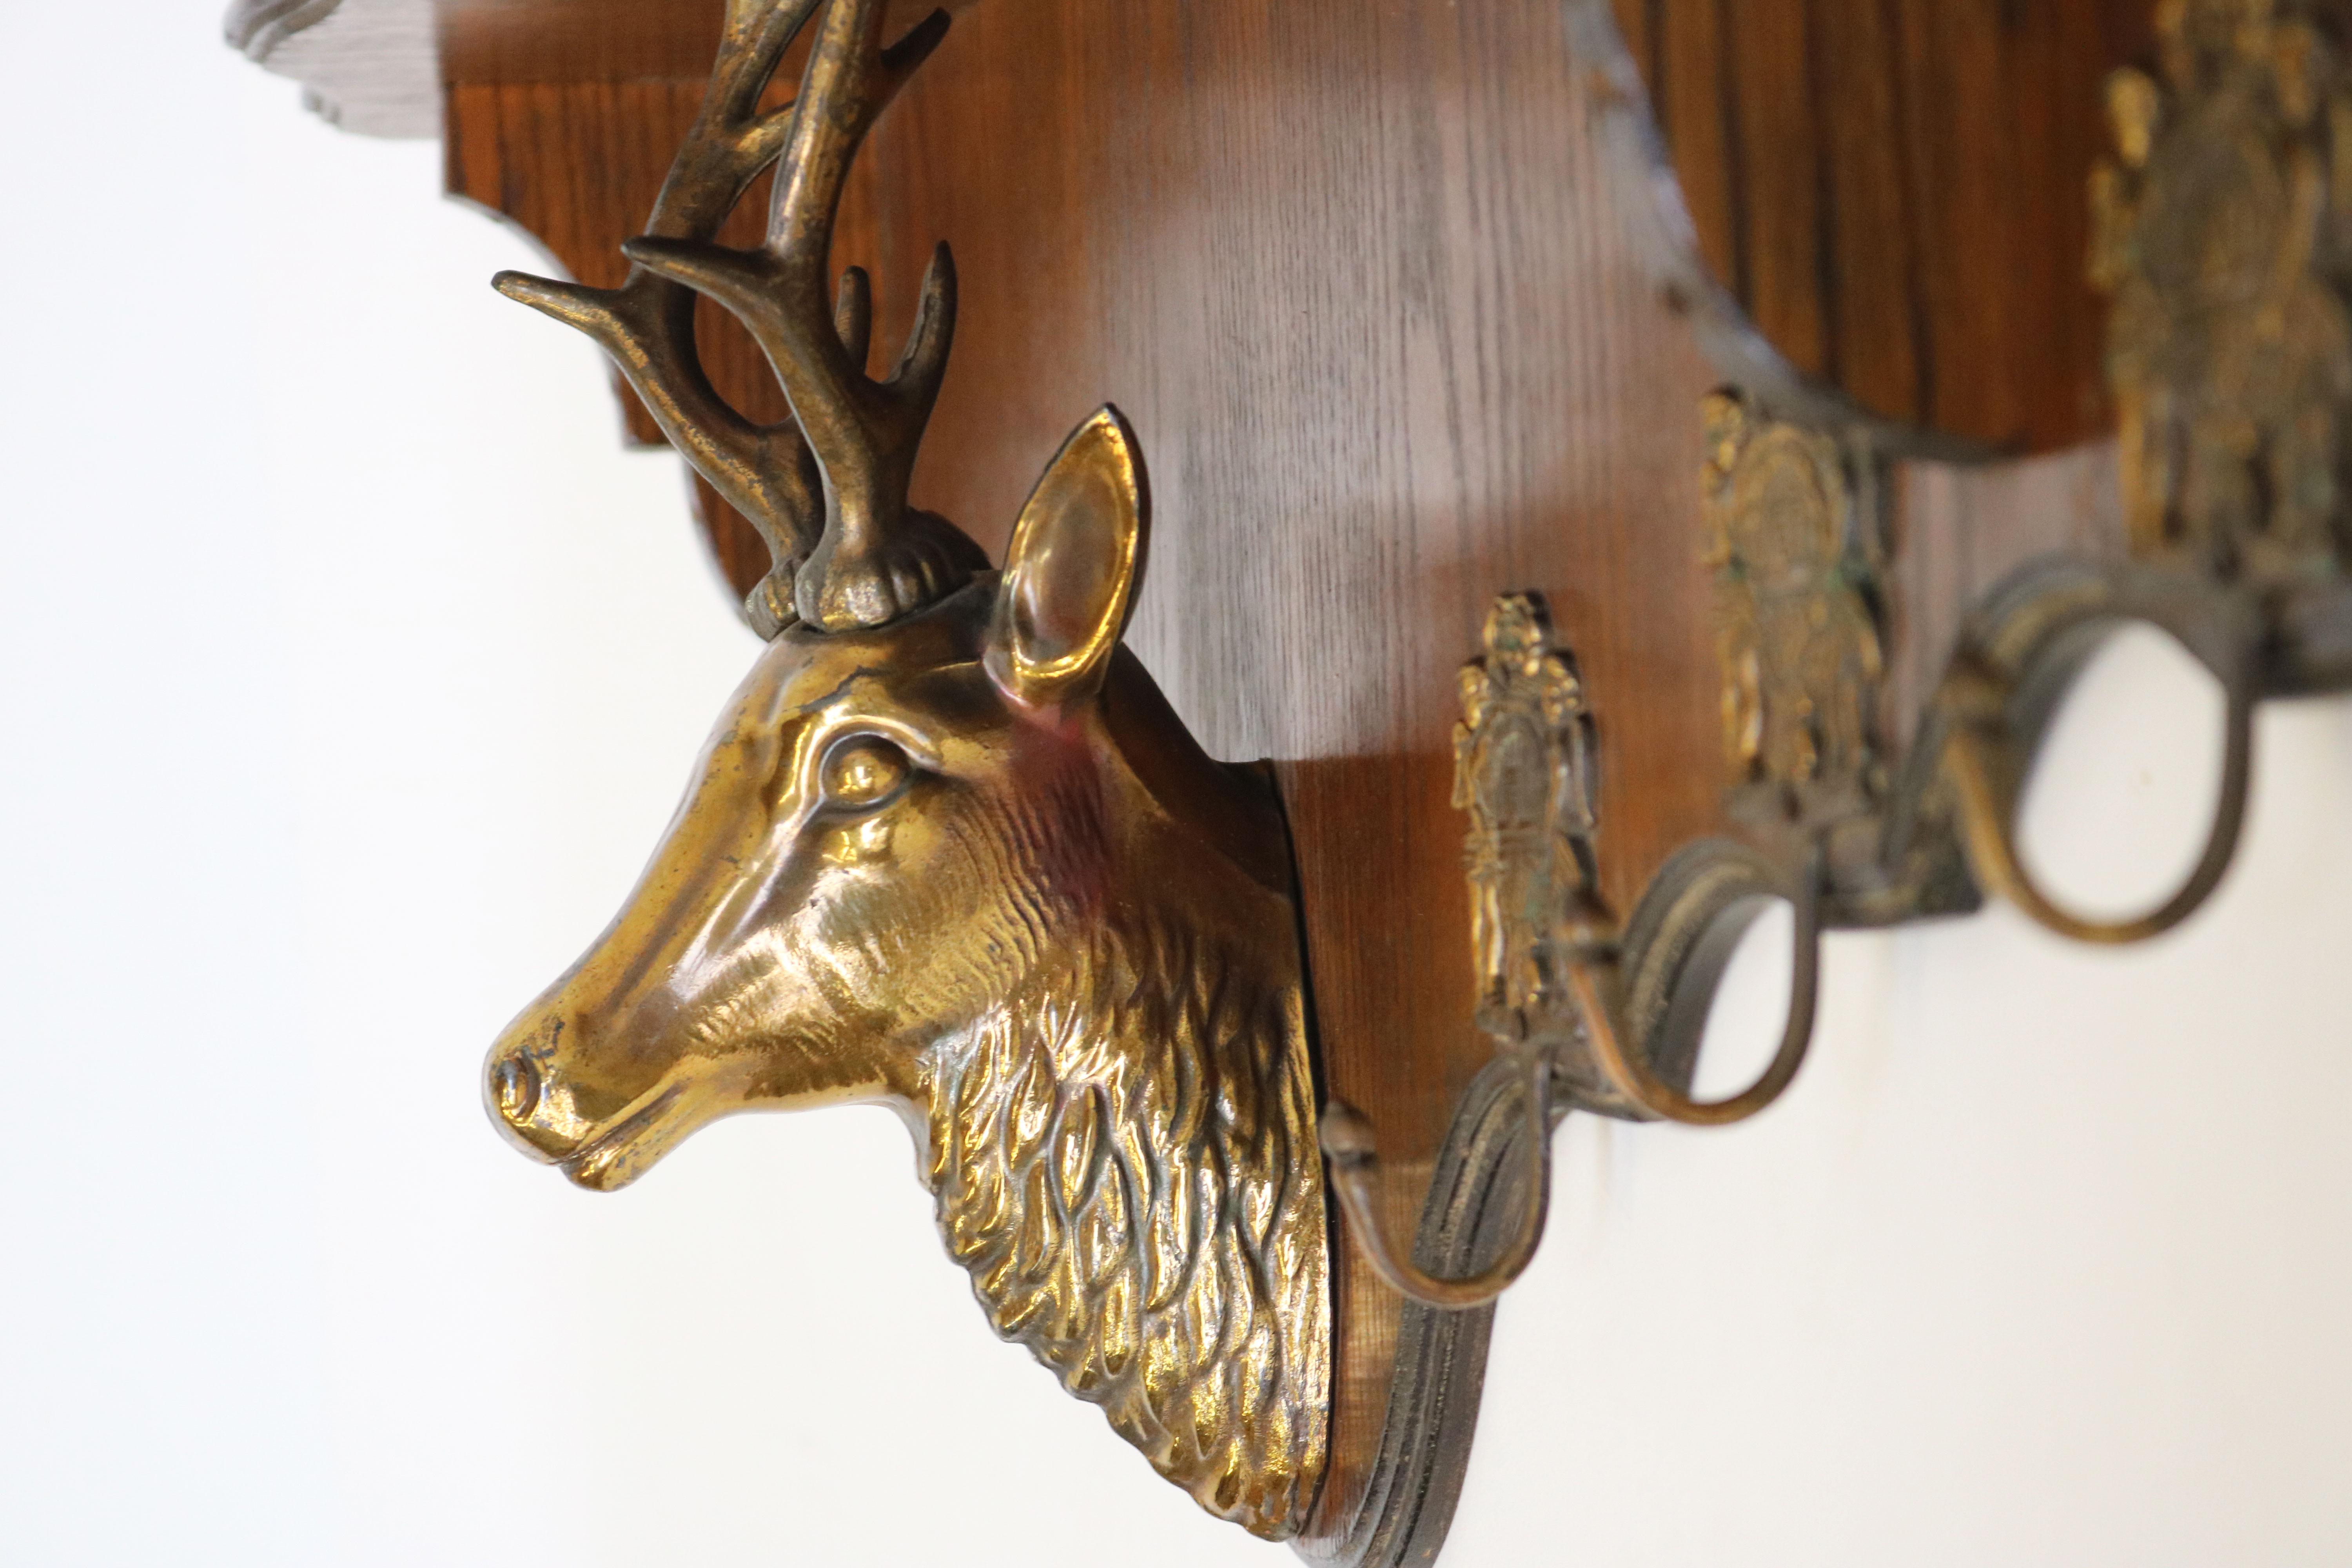 Gorgeous & unique antique coat rack from France 1940's.  
The coatrack has a large brass deer head that uses his antlers to support the hat rack.  
The coat rack is made out of oak and has 6 nicely decorated original hooks.  
It is in nice antique